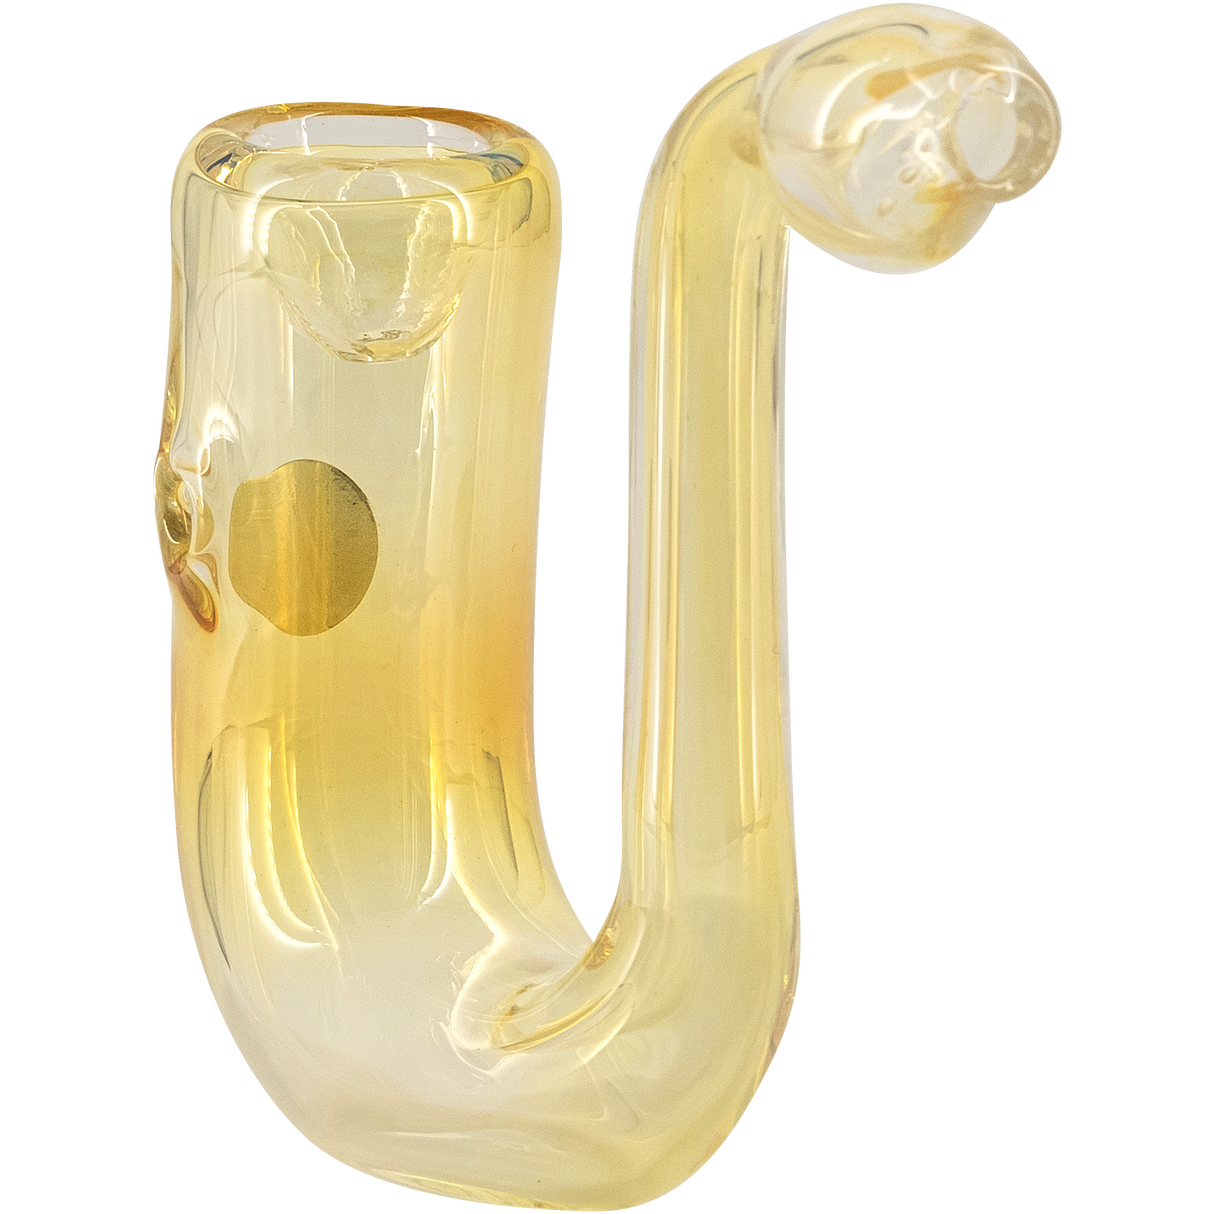 LA Pipes "Calabash" Fumed Glass Sherlock Hand Pipe, Color Changing Design, 4" Tall